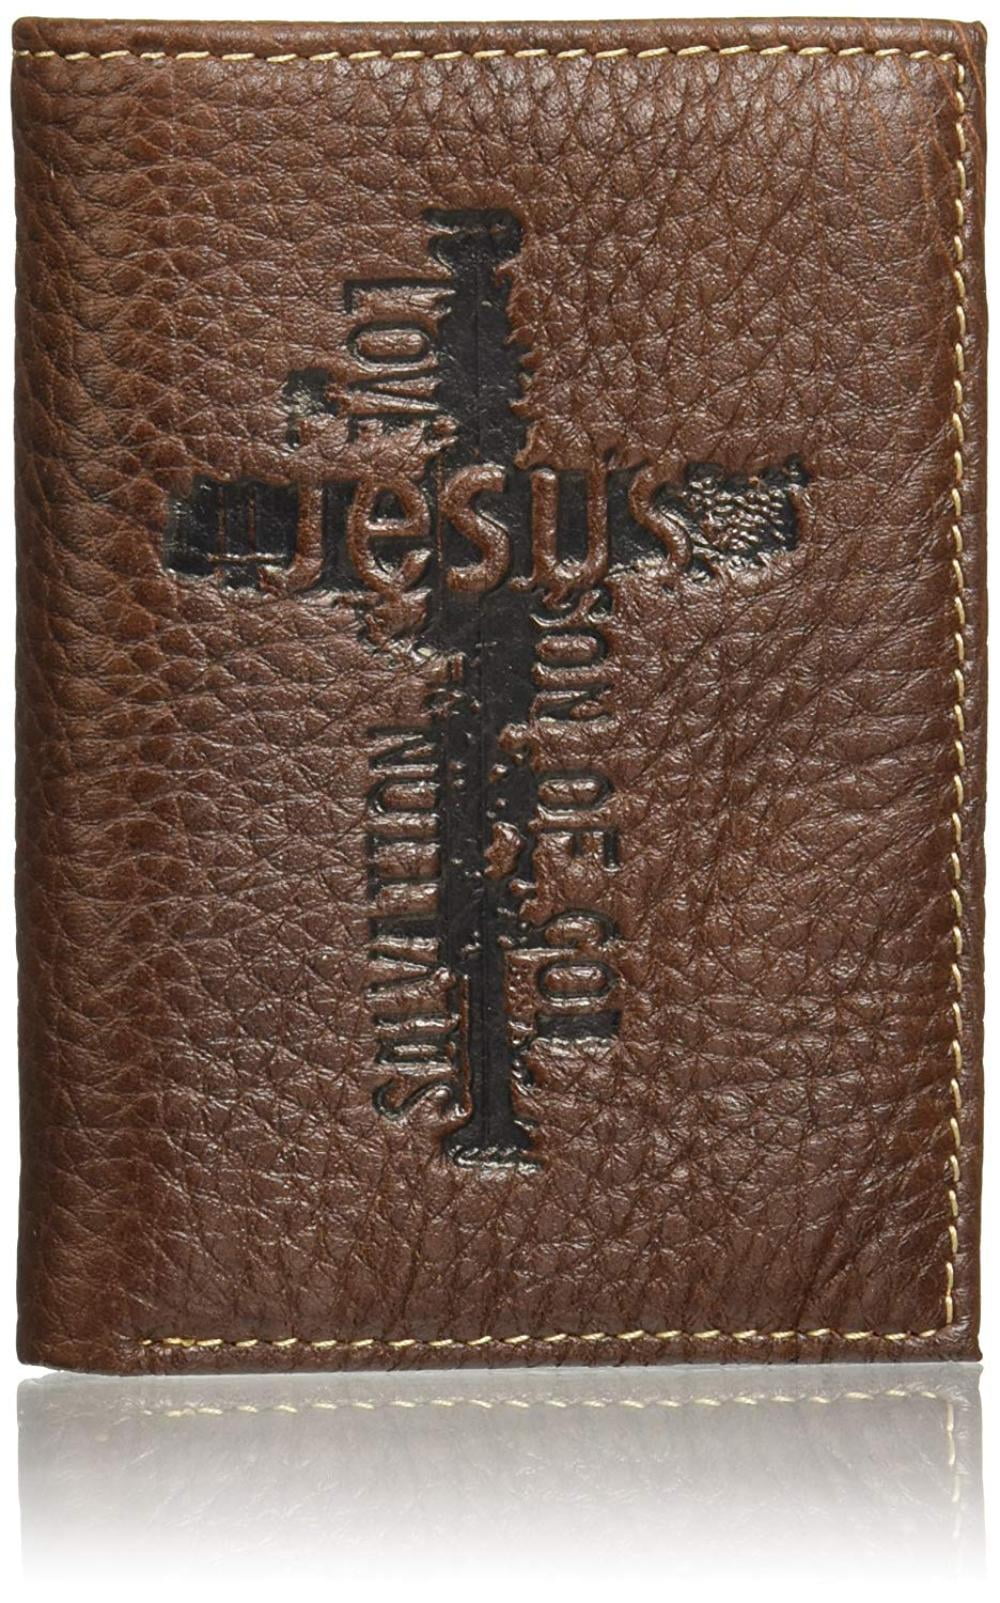 Christian Art Gifts - Brown Genuine Leather Tri-Fold Wallet w/Cross, 4 1/4 x3 1/4 x 3/4 By ...